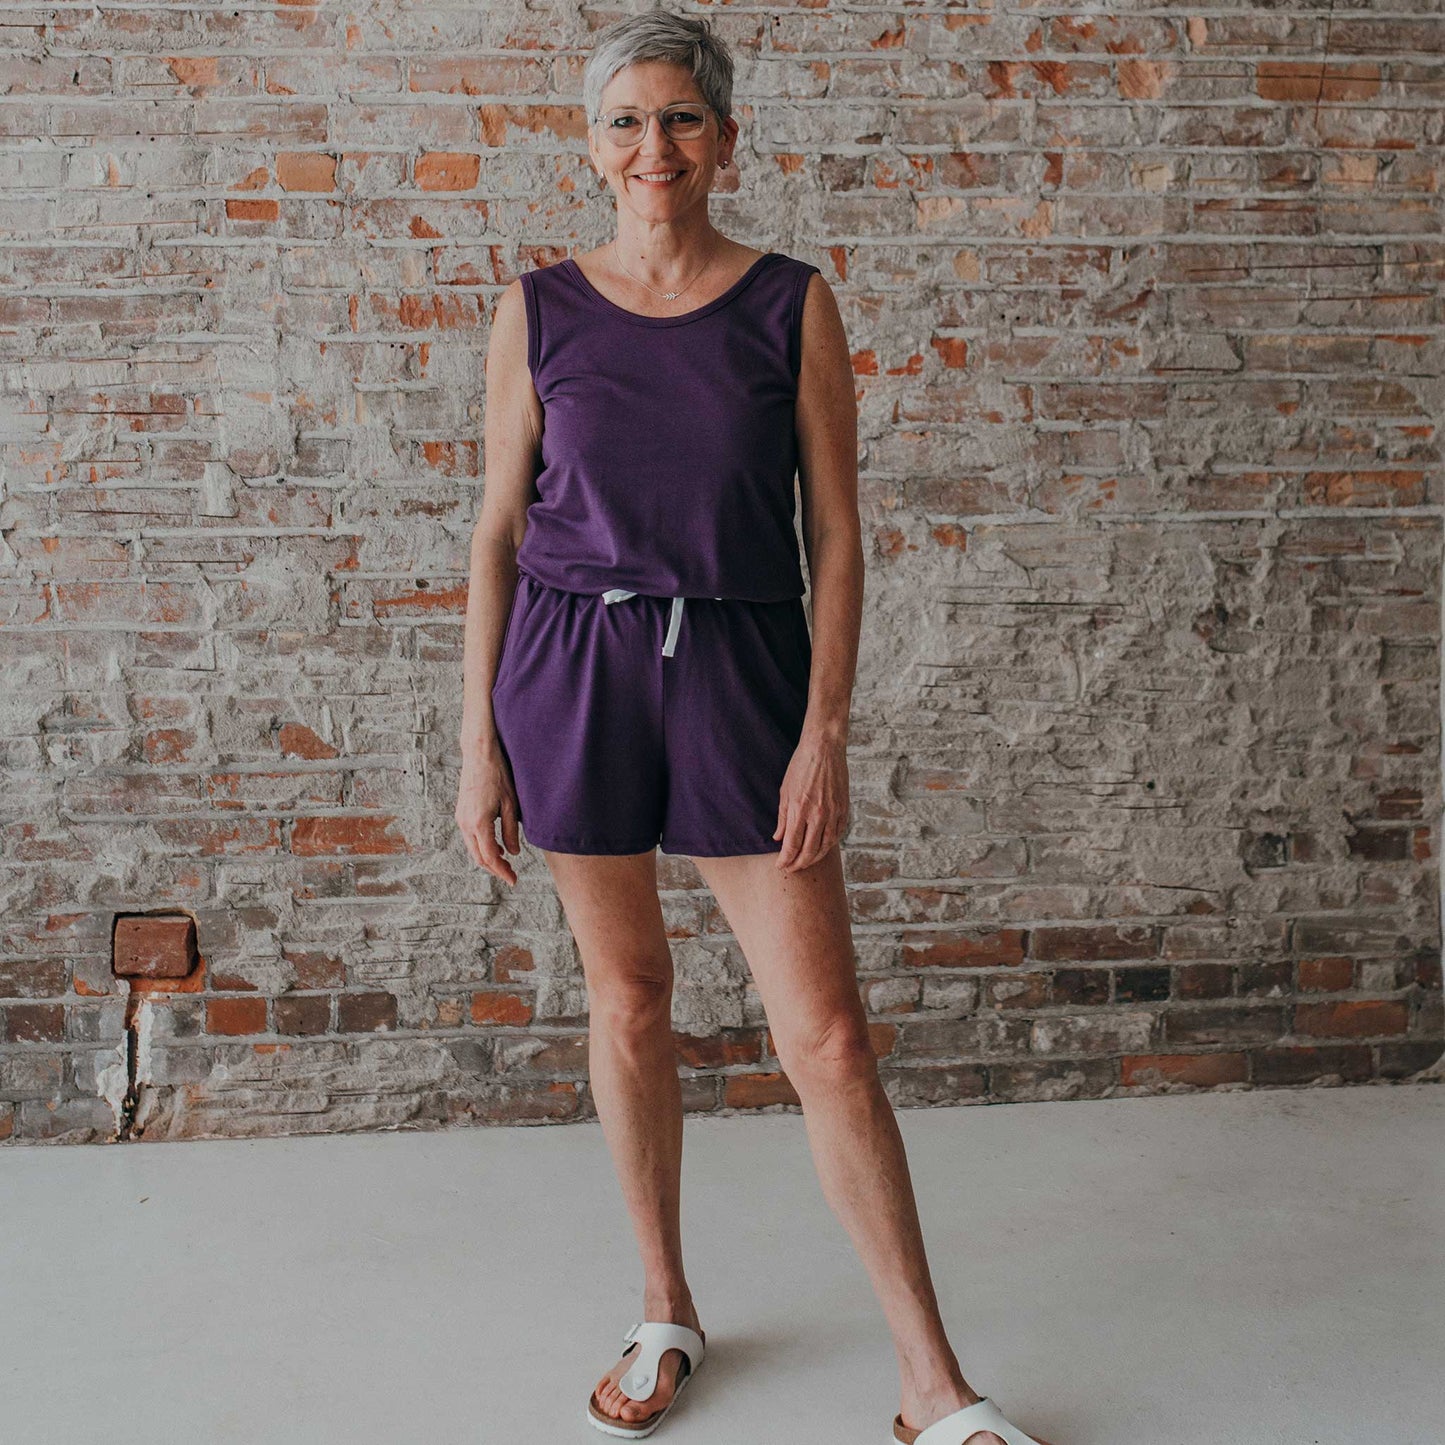 Wooly Doodle | Ladies Tank Romper, No Plum Intended, Lifestyle | Medium Shown on 5'10" Woman